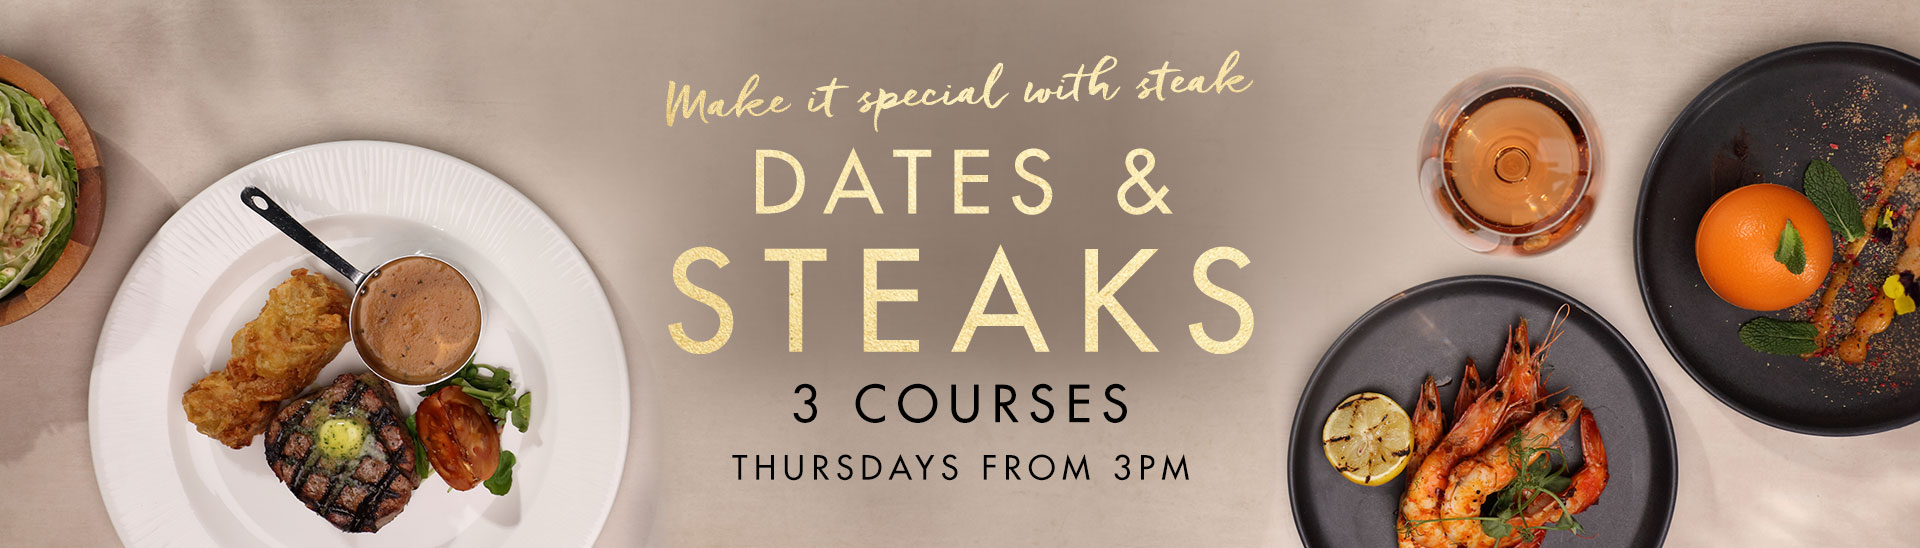 Dates & Steaks at Miller & Carter Rothley